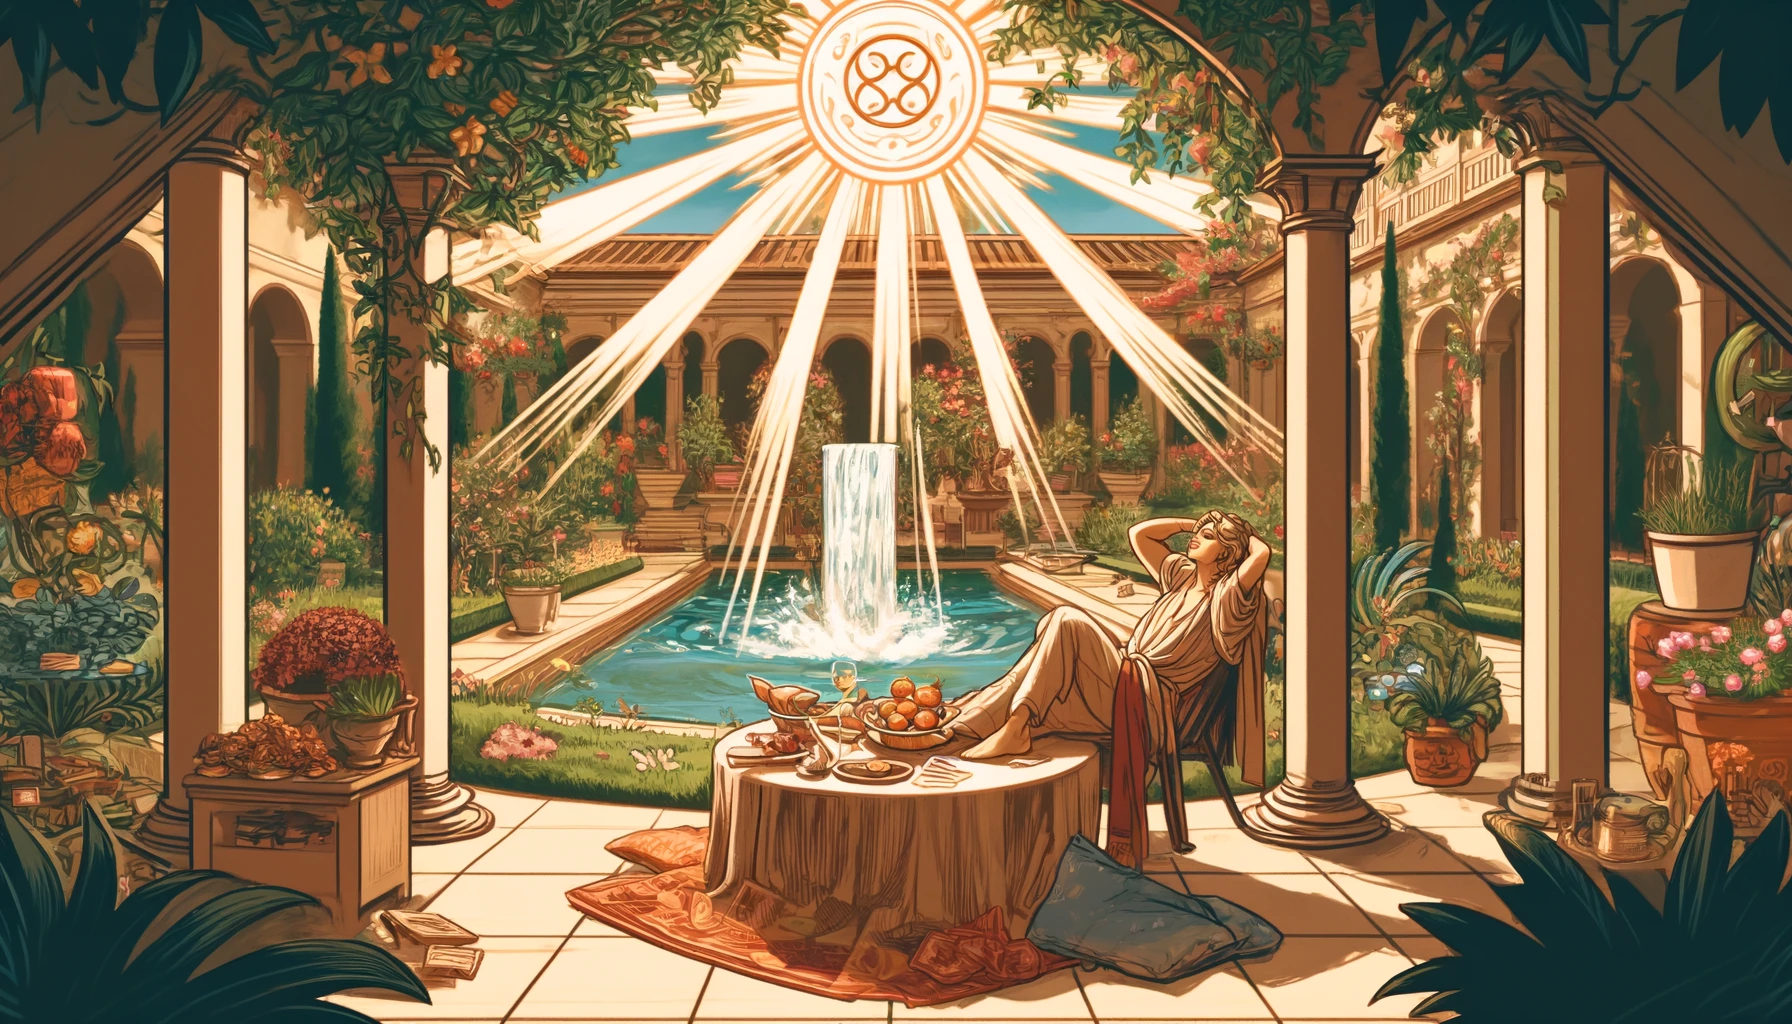 The image portrays an individual standing confidently in a vibrant garden or luxurious environment, surrounded by symbols of success and abundance. The person exudes a sense of pride and contentment, reflecting the rewards of hard work and independence. The scene evokes themes of prosperity, personal achievement, and fulfillment through self-reliance, highlighting a deep sense of satisfaction and contentment with both personal and financial independence.